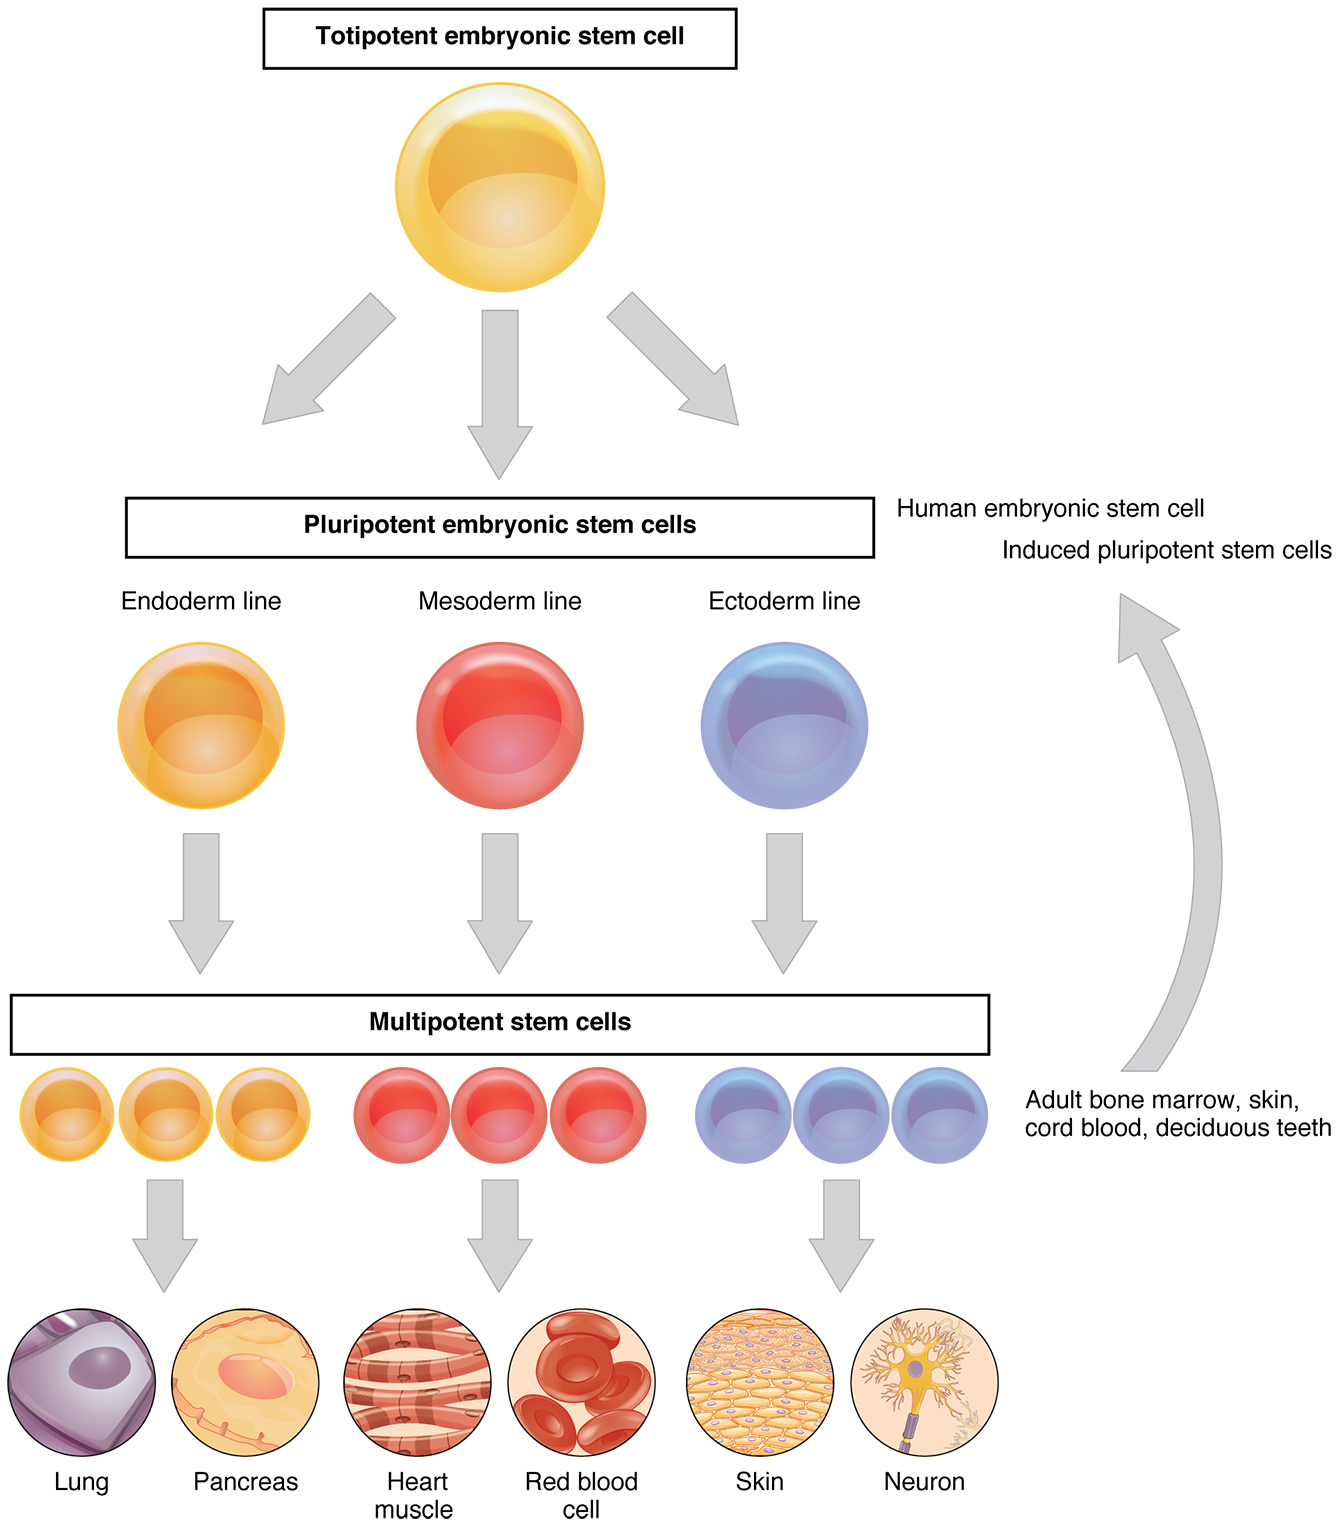 This flow chart shows the differentiation of stem cells into different